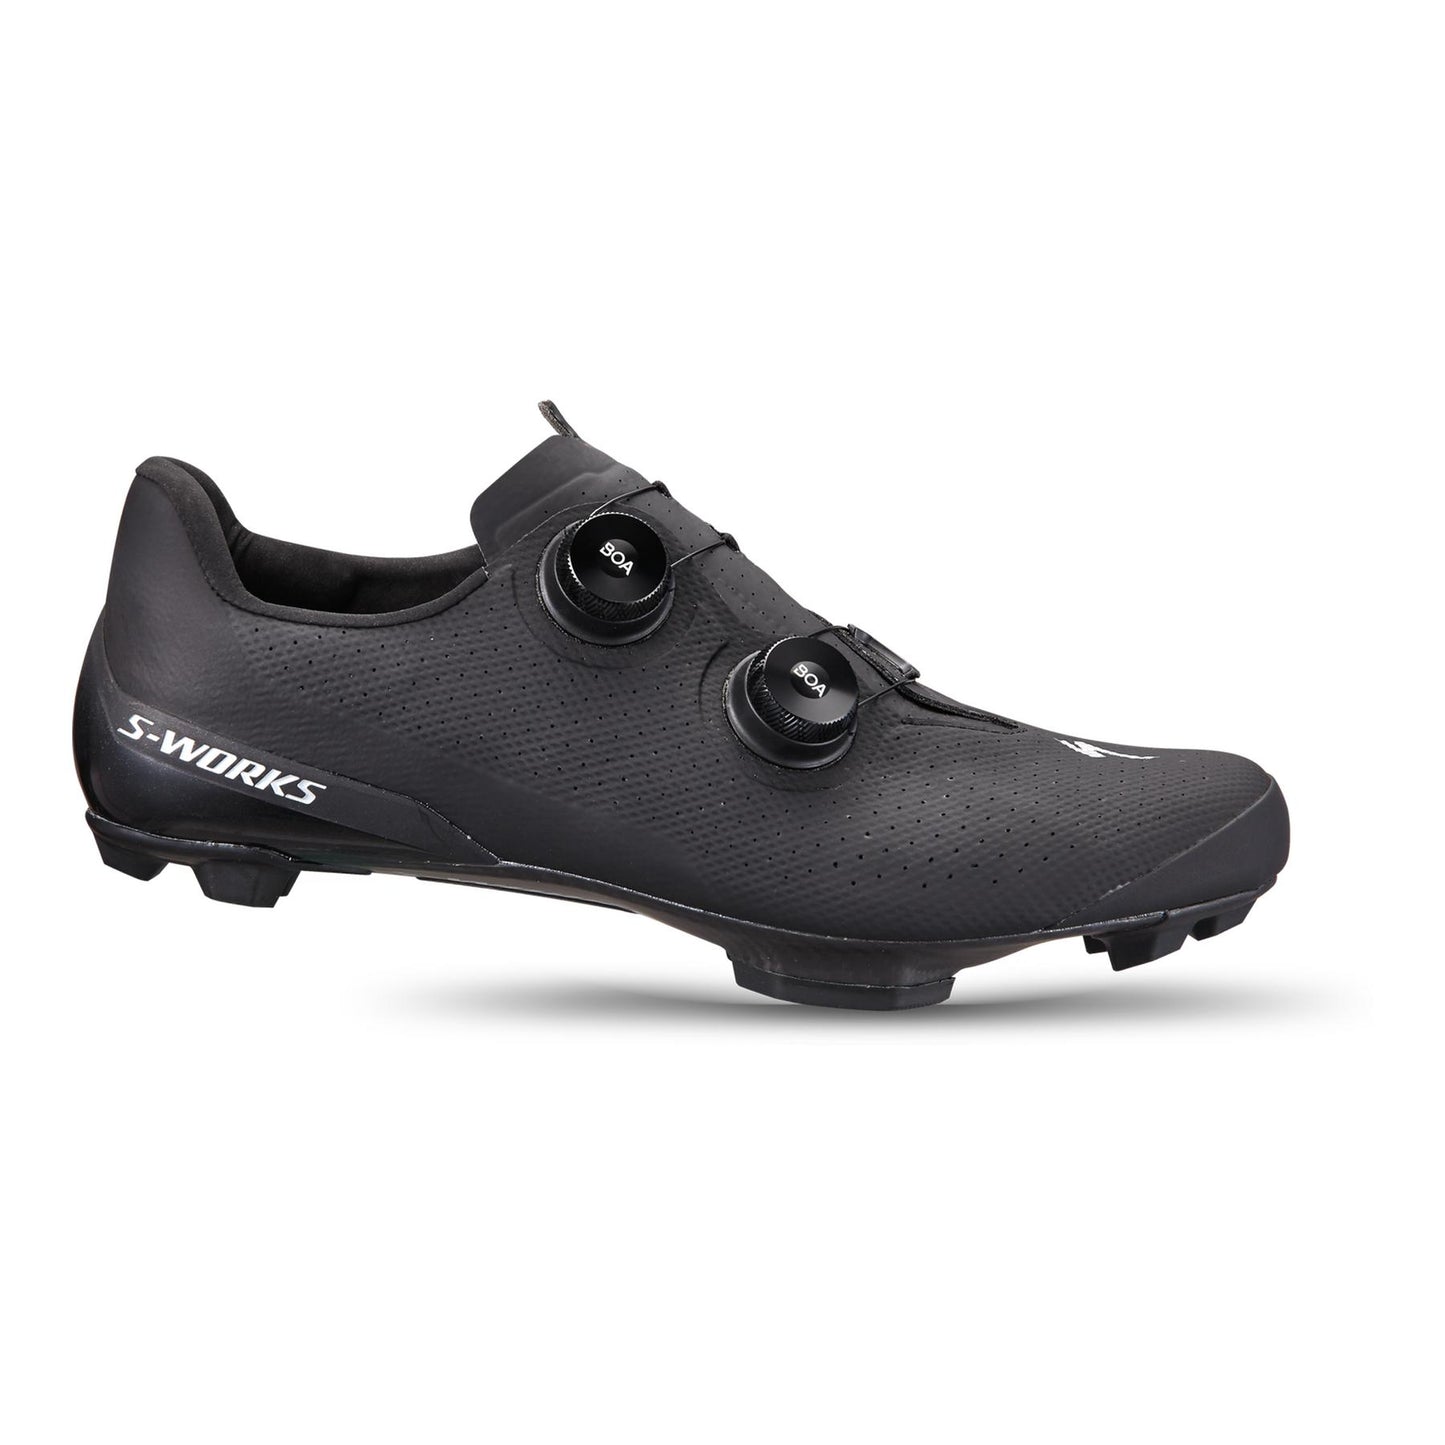 S-Works Recon Shoe in Black